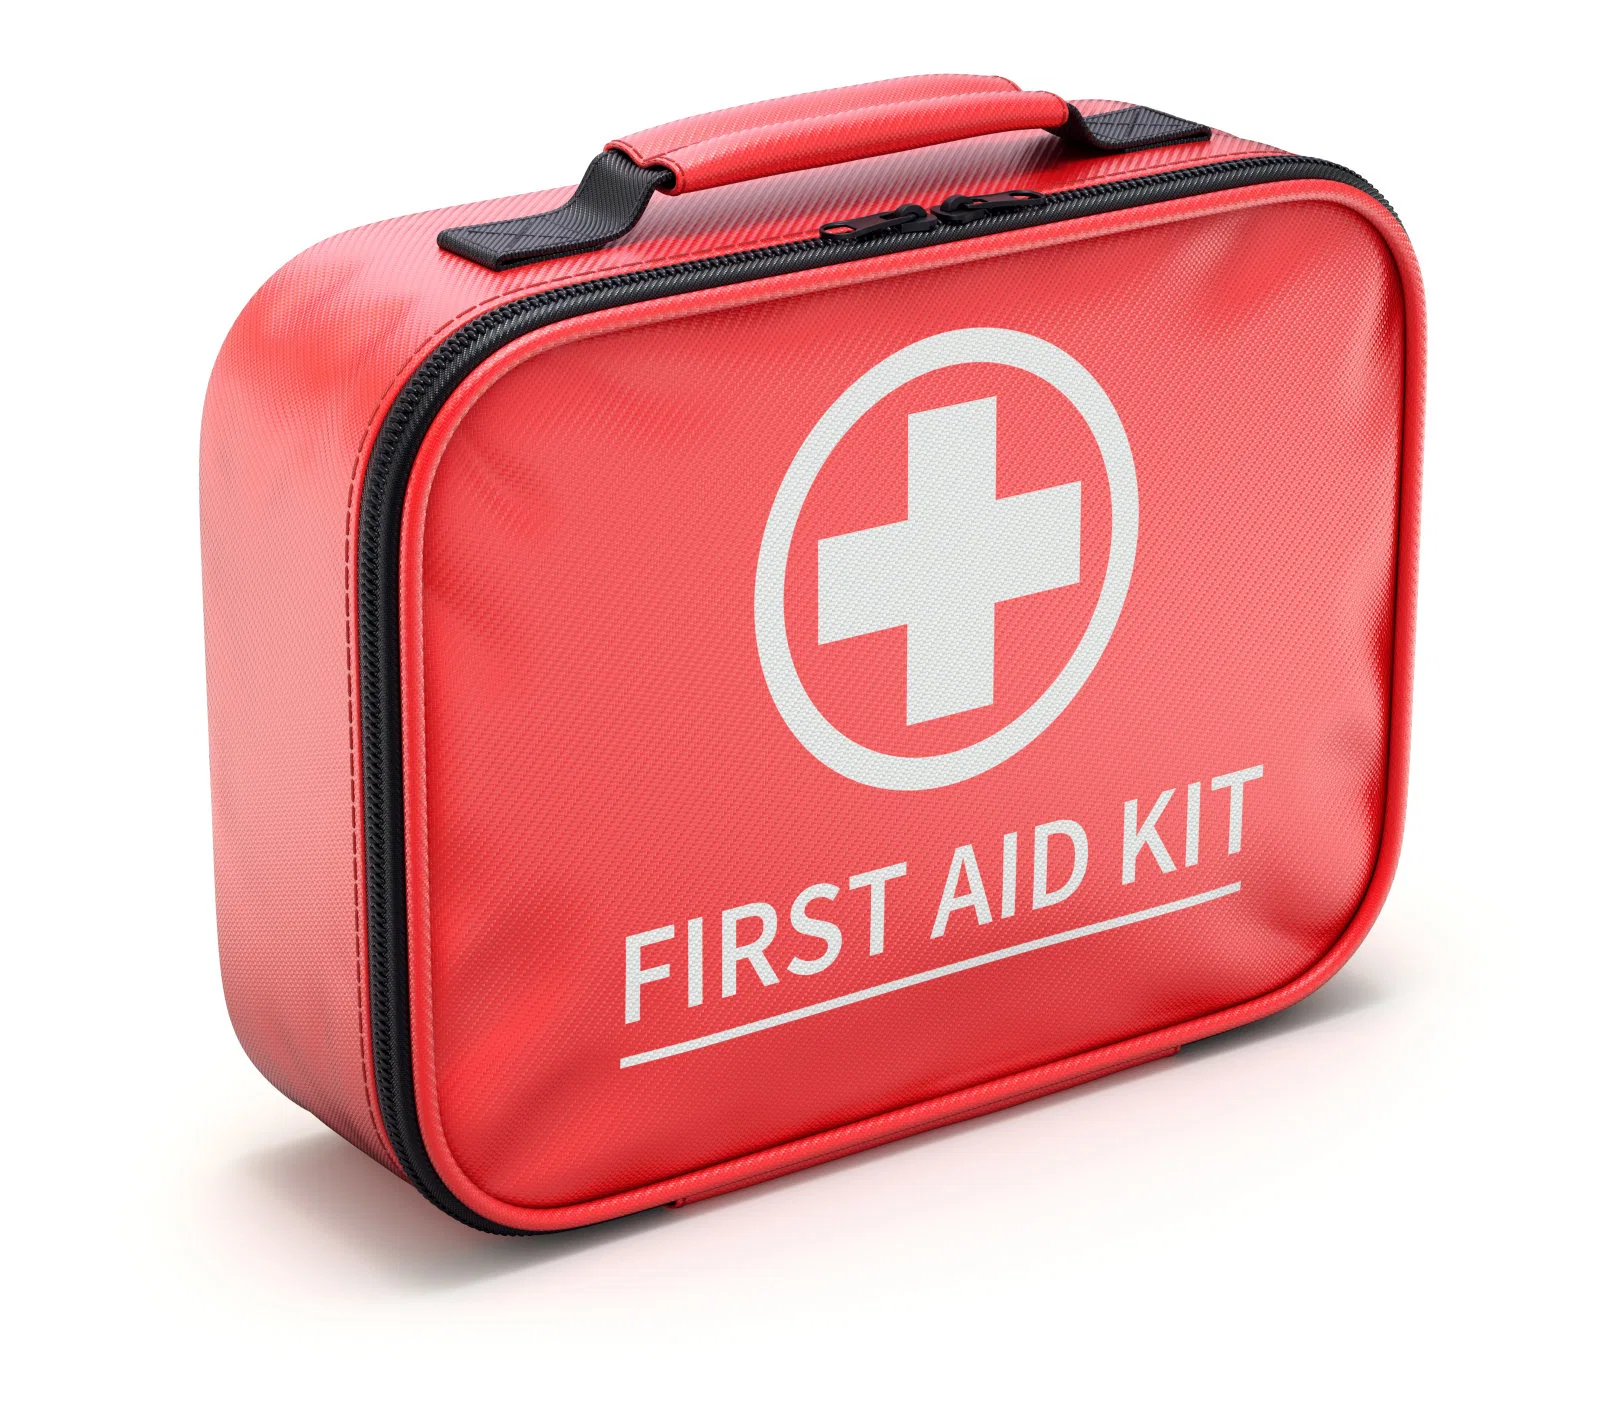 ABS Plastic First Aid Kit Waterproof Medical Travel First Aid Box